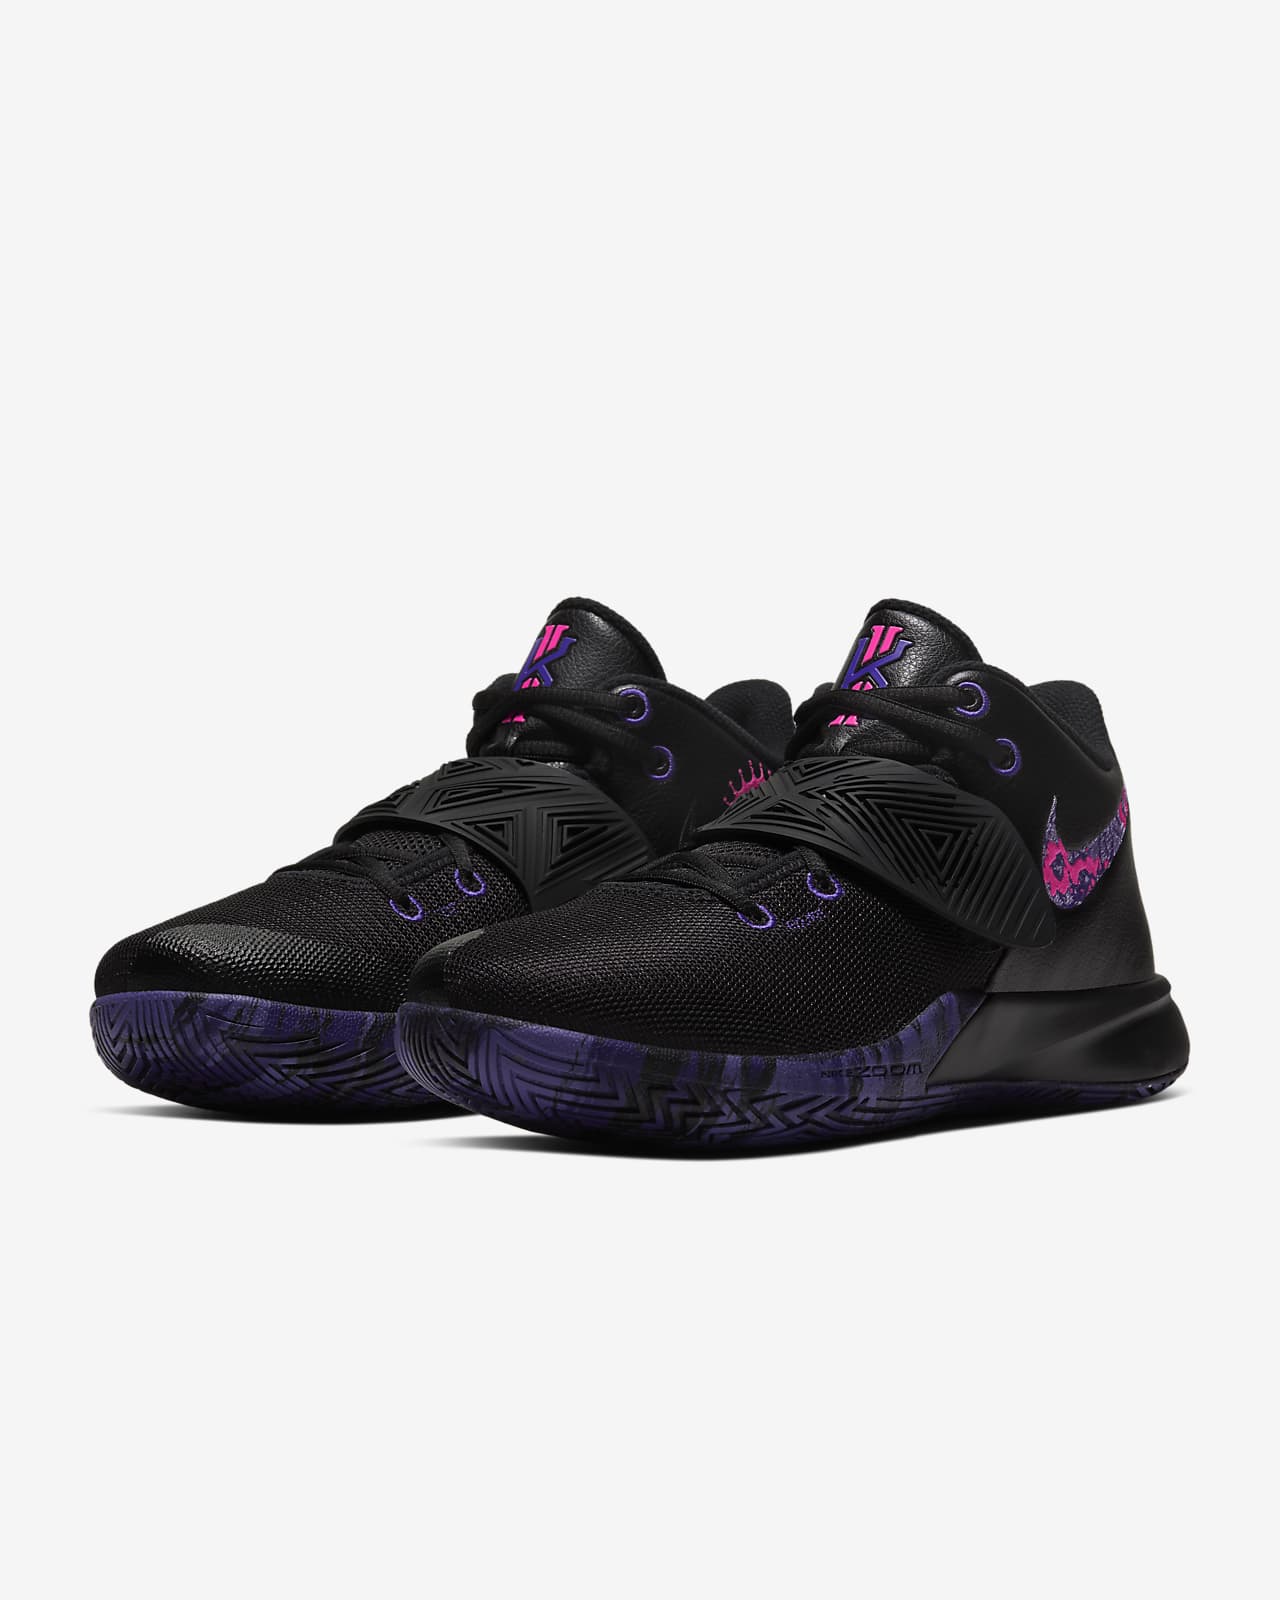 kyrie 3 xdr